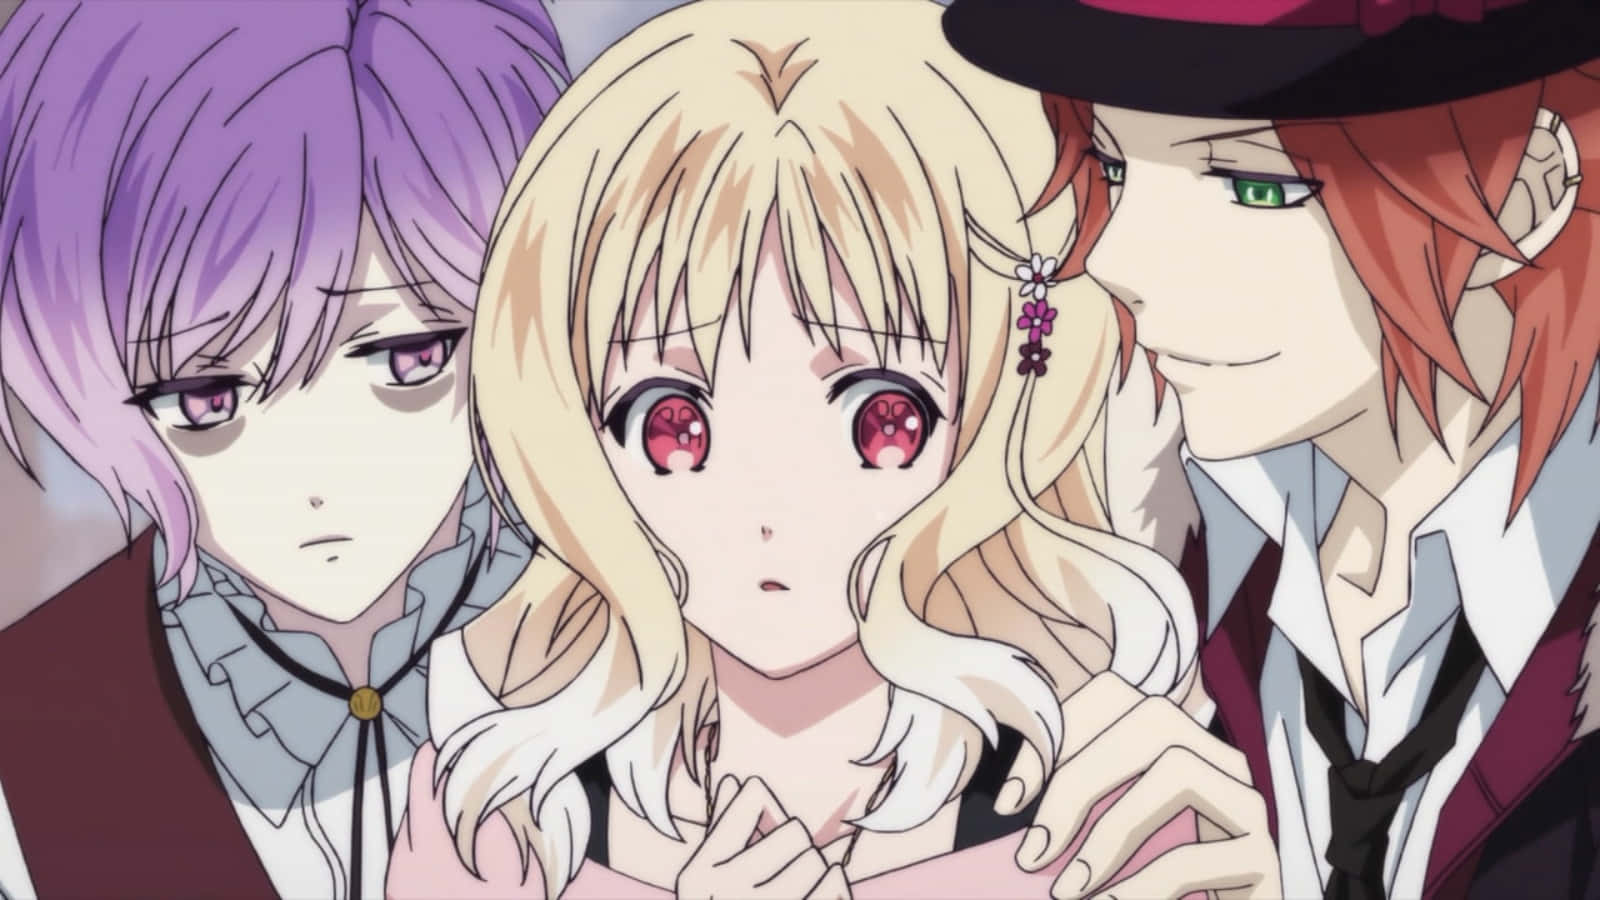 "The Cast of Diabolik Lovers: Blood-Stained Romance"